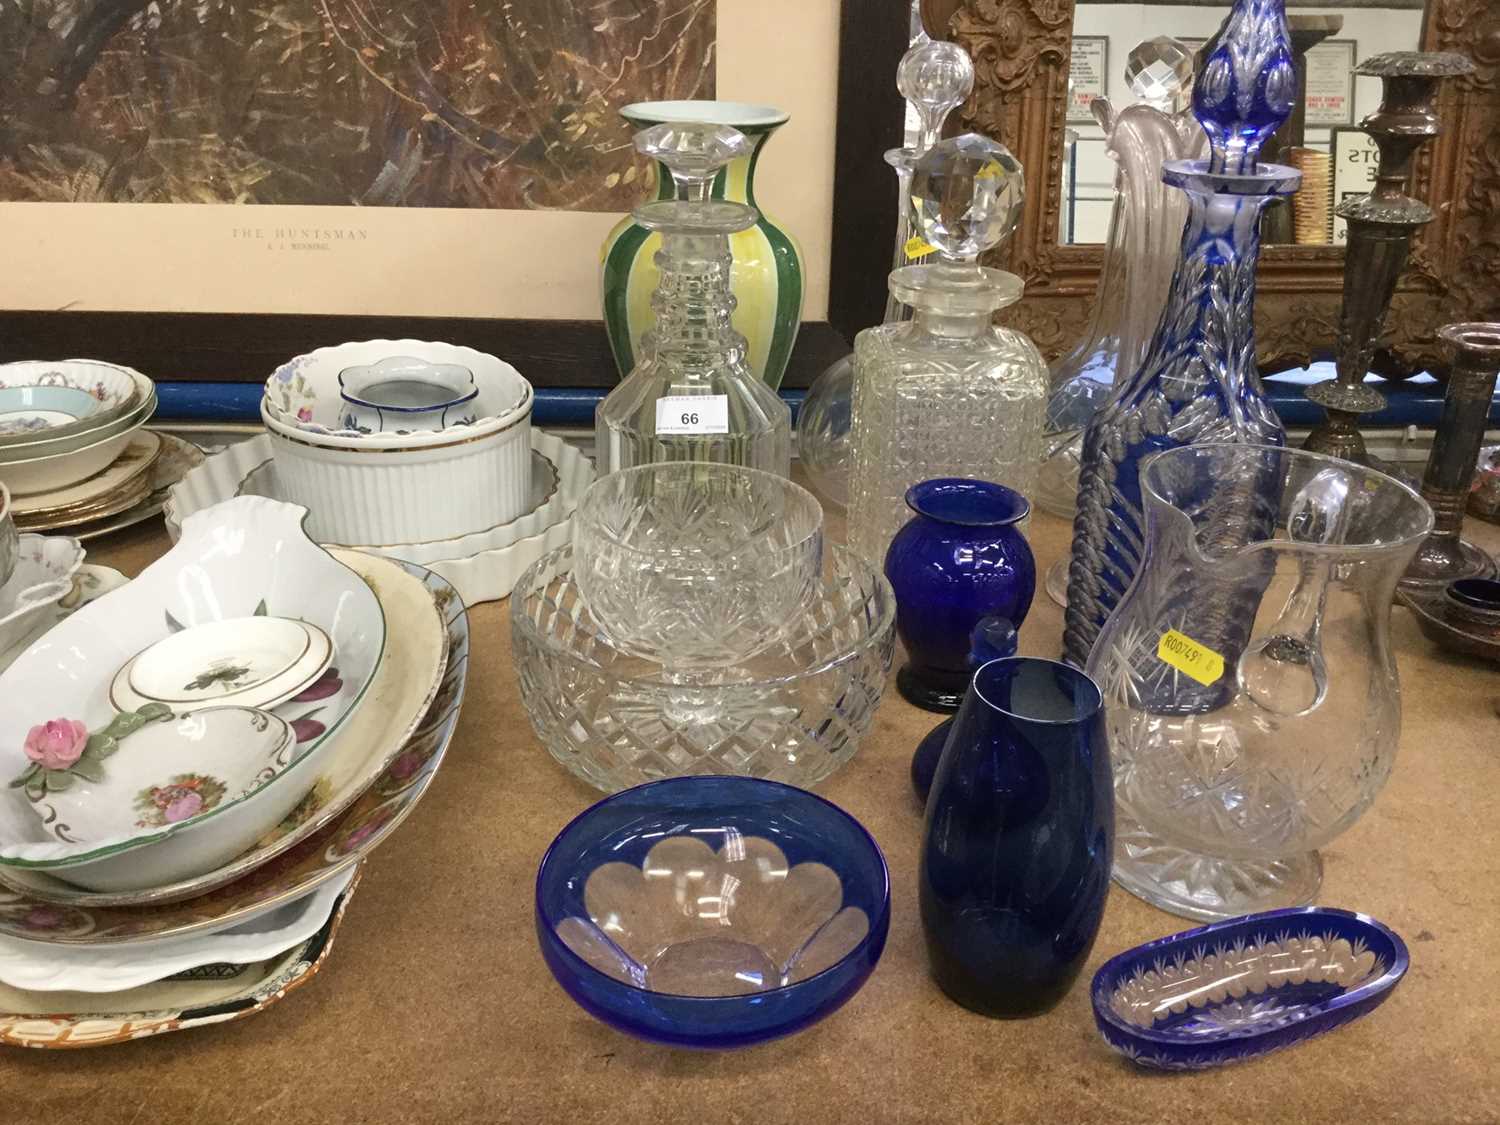 Lot 66 - Mixed group of 19th century and later ceramics to include English teaware, blue glass and other decanters